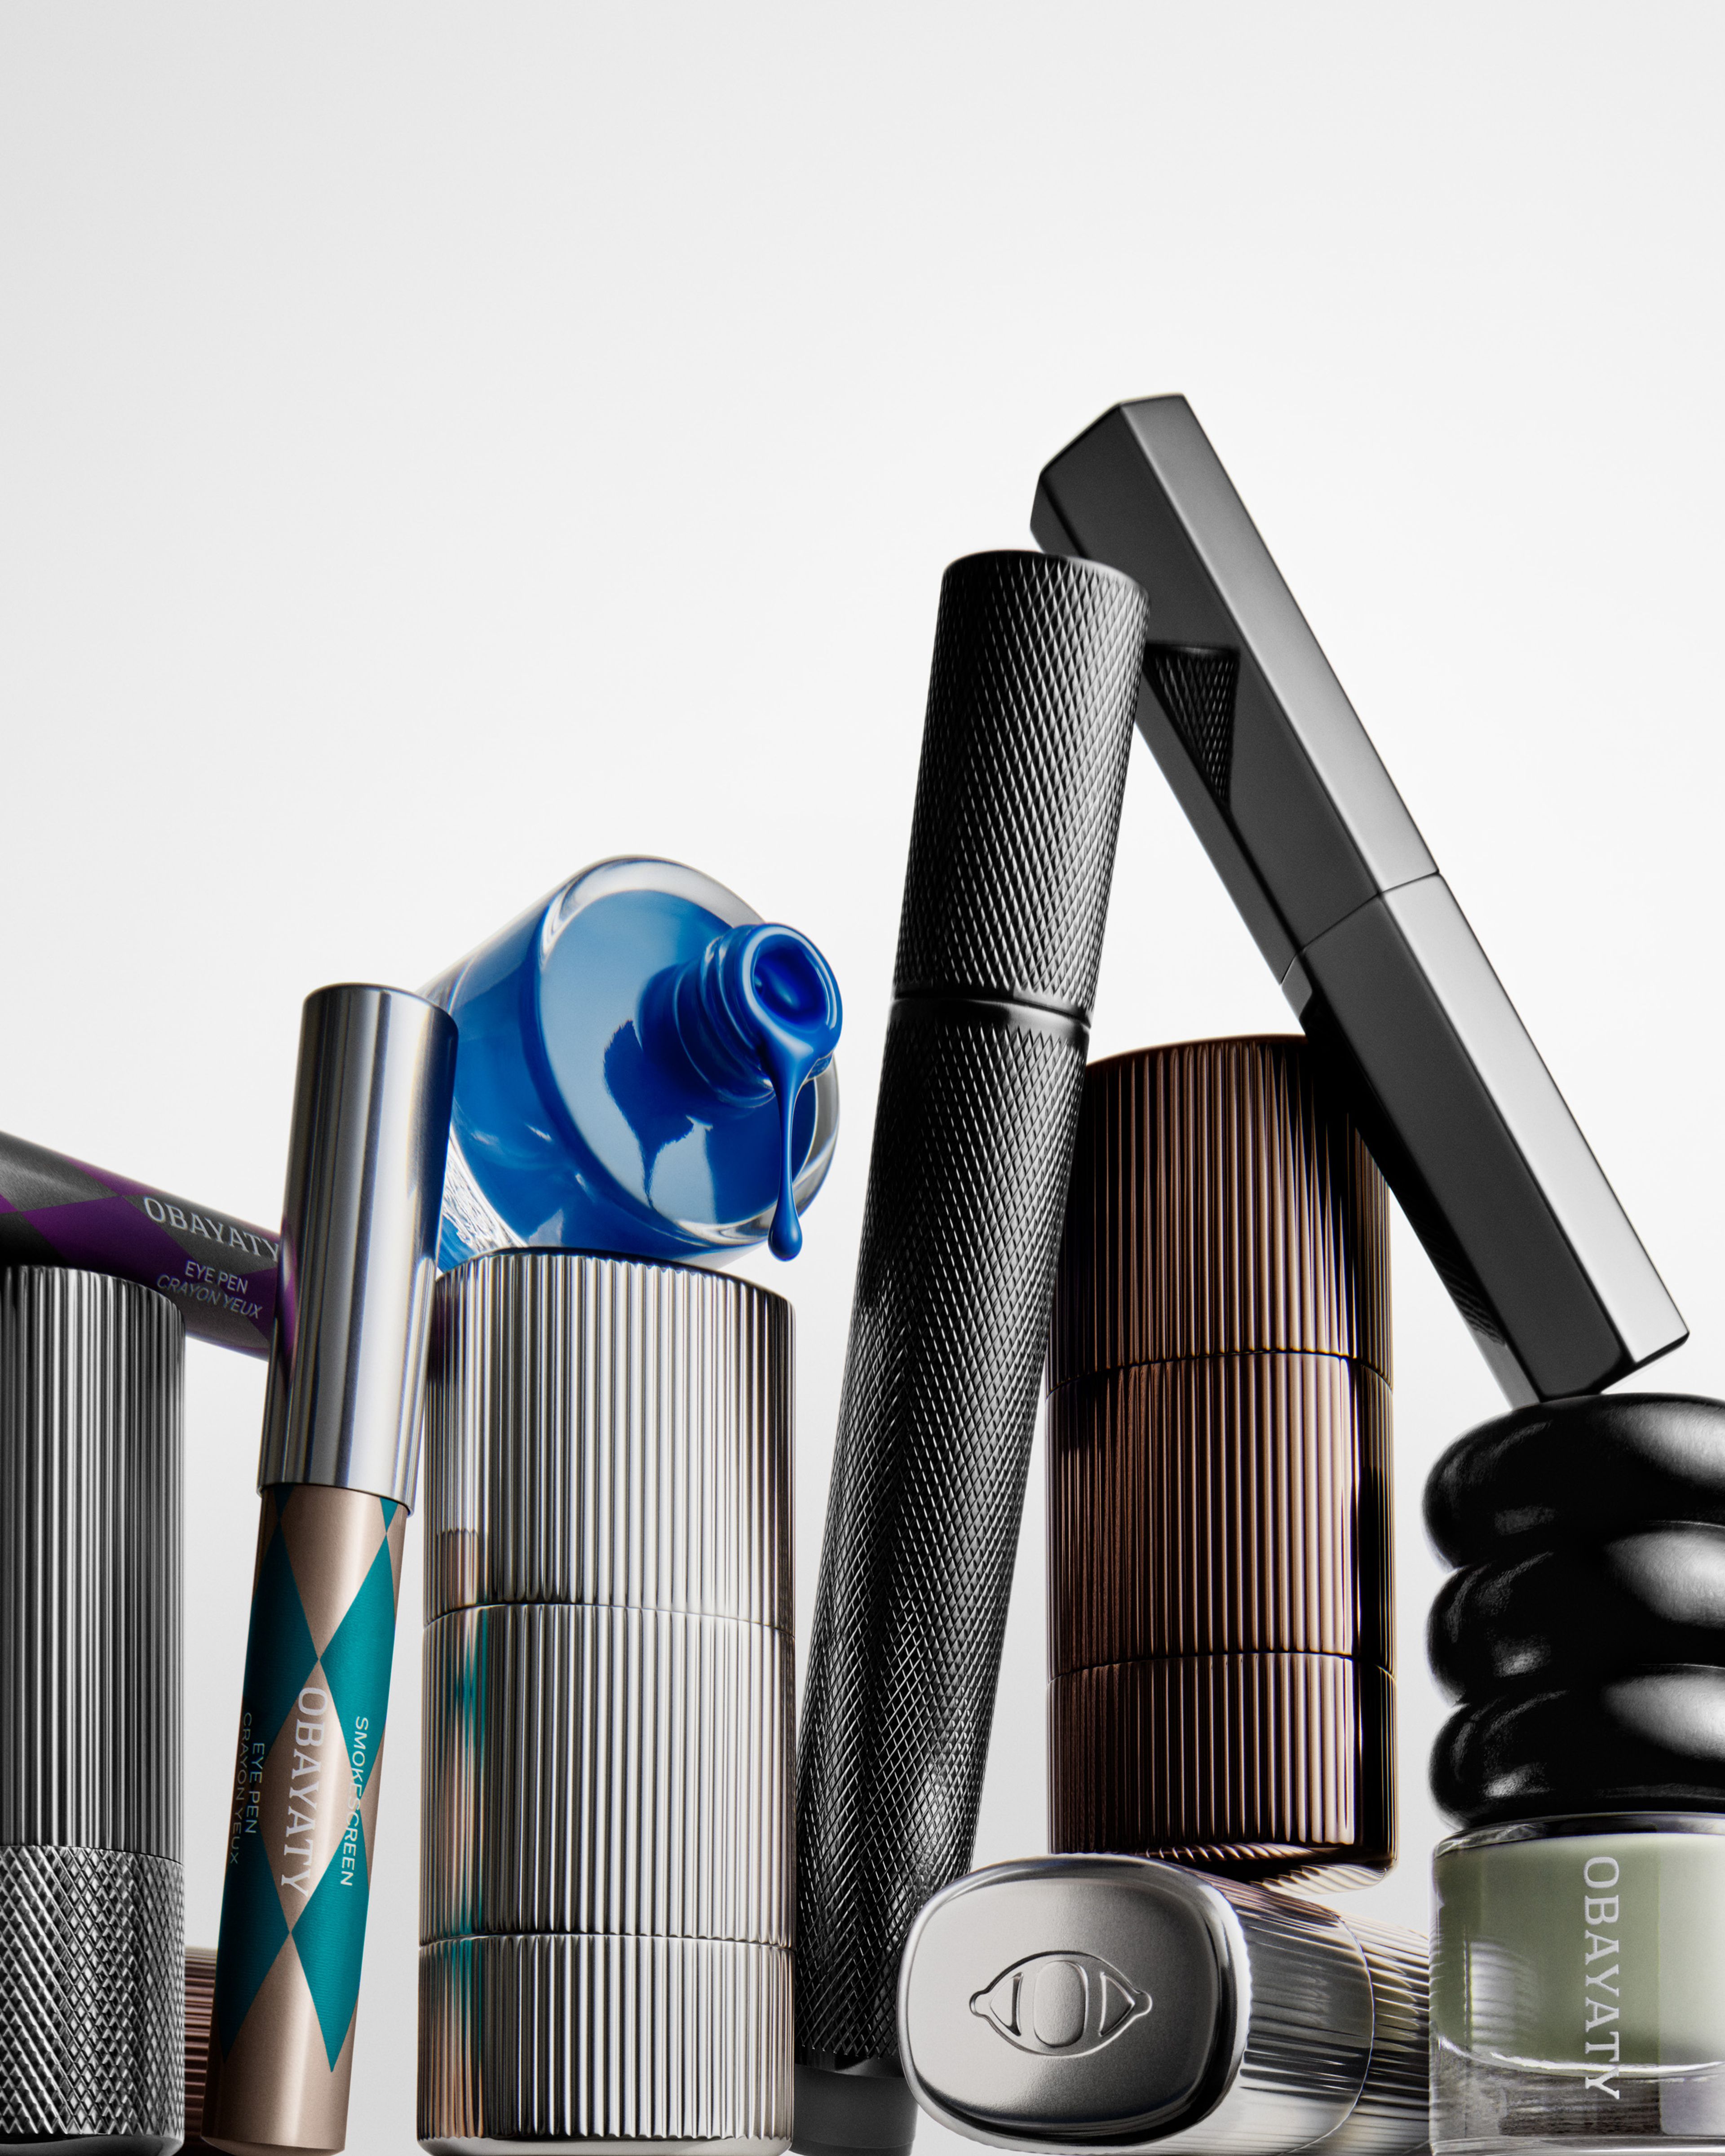 A group of several make up products in different materials and forms in front of a white background